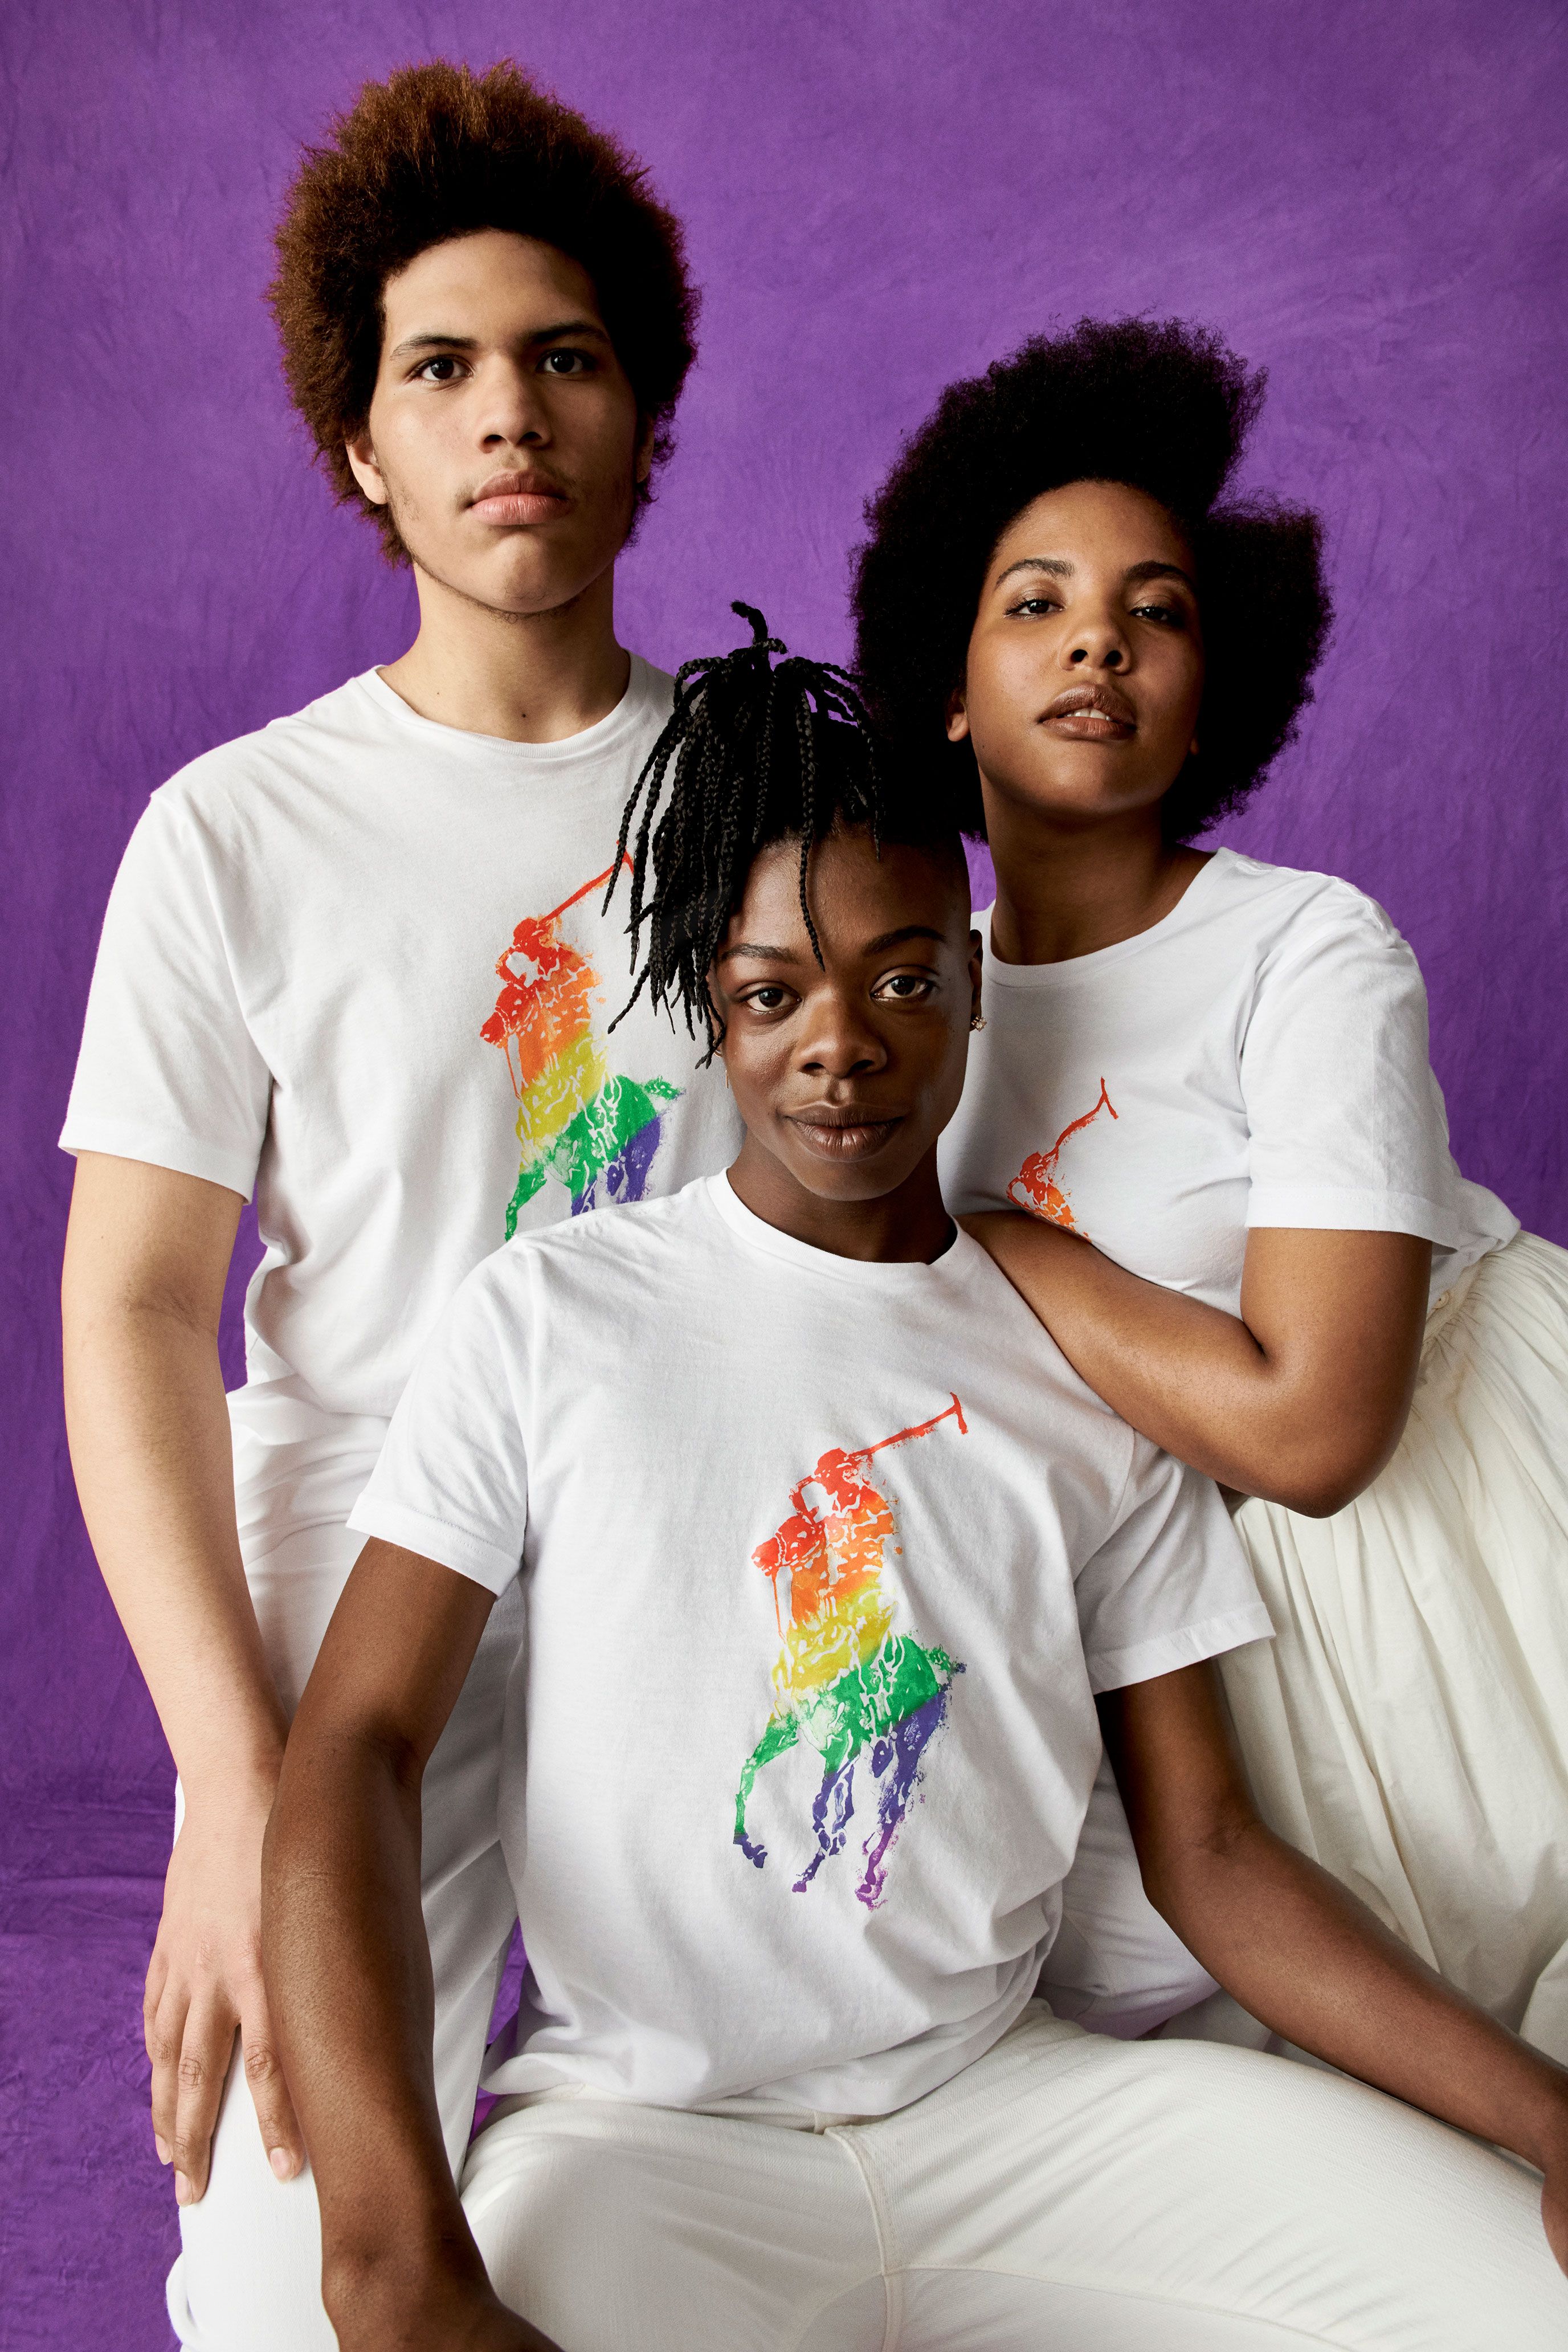 Ralph Lauren Made a Rainbow Pony for Pride Month